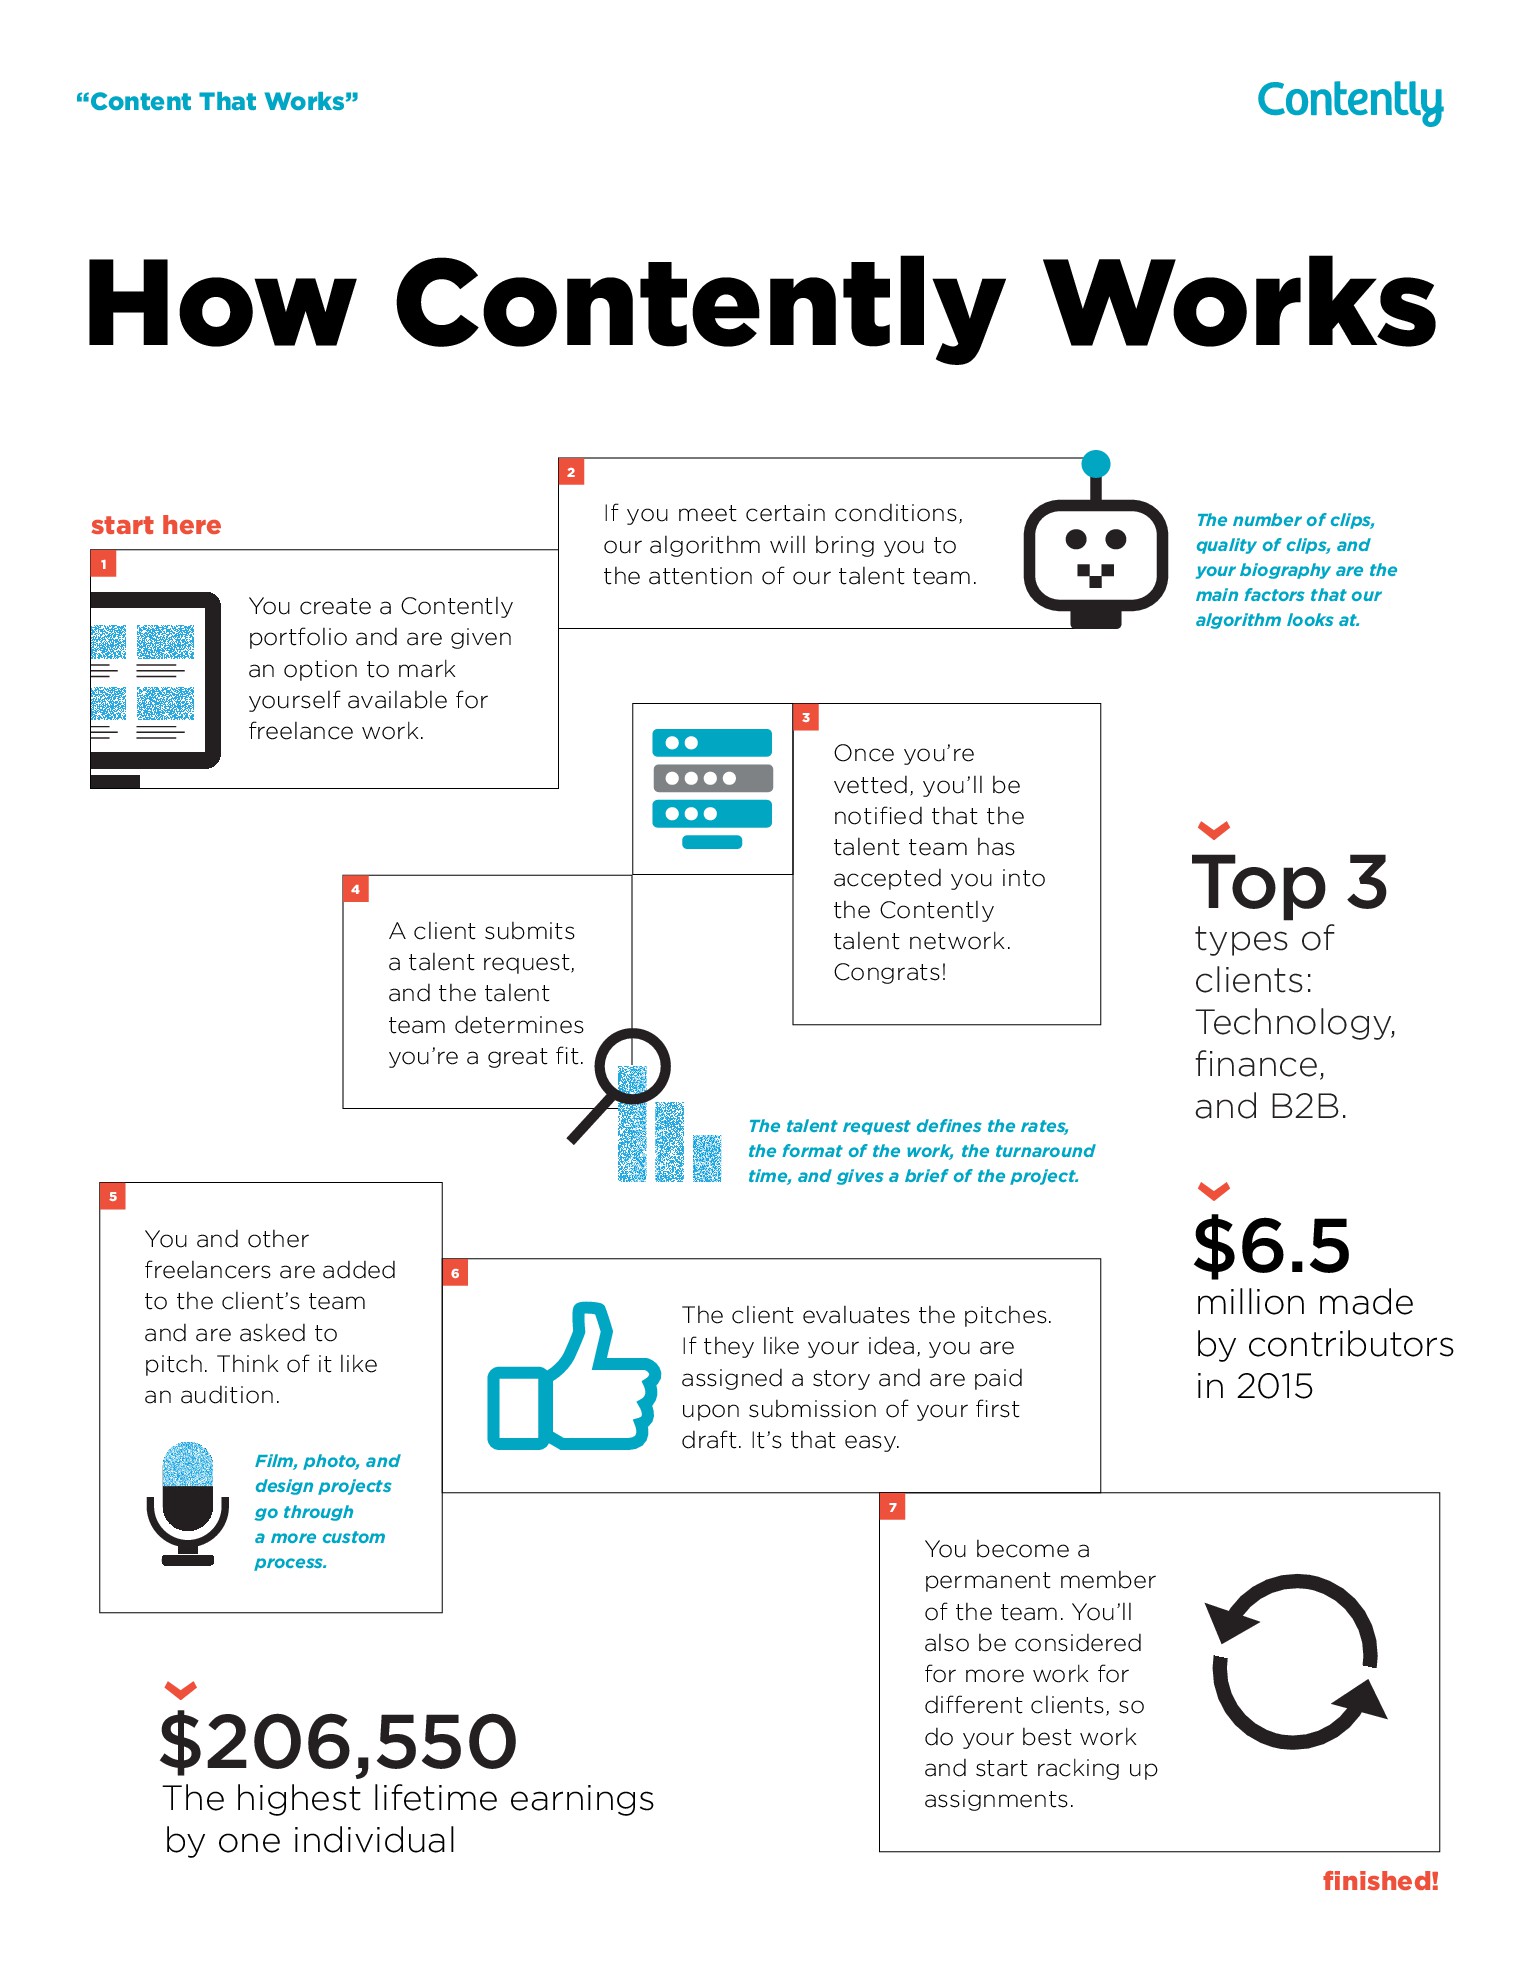 http://contently.net/wp-content/uploads/2016/07/How-Contently-Works-for-Freelancers.jpg